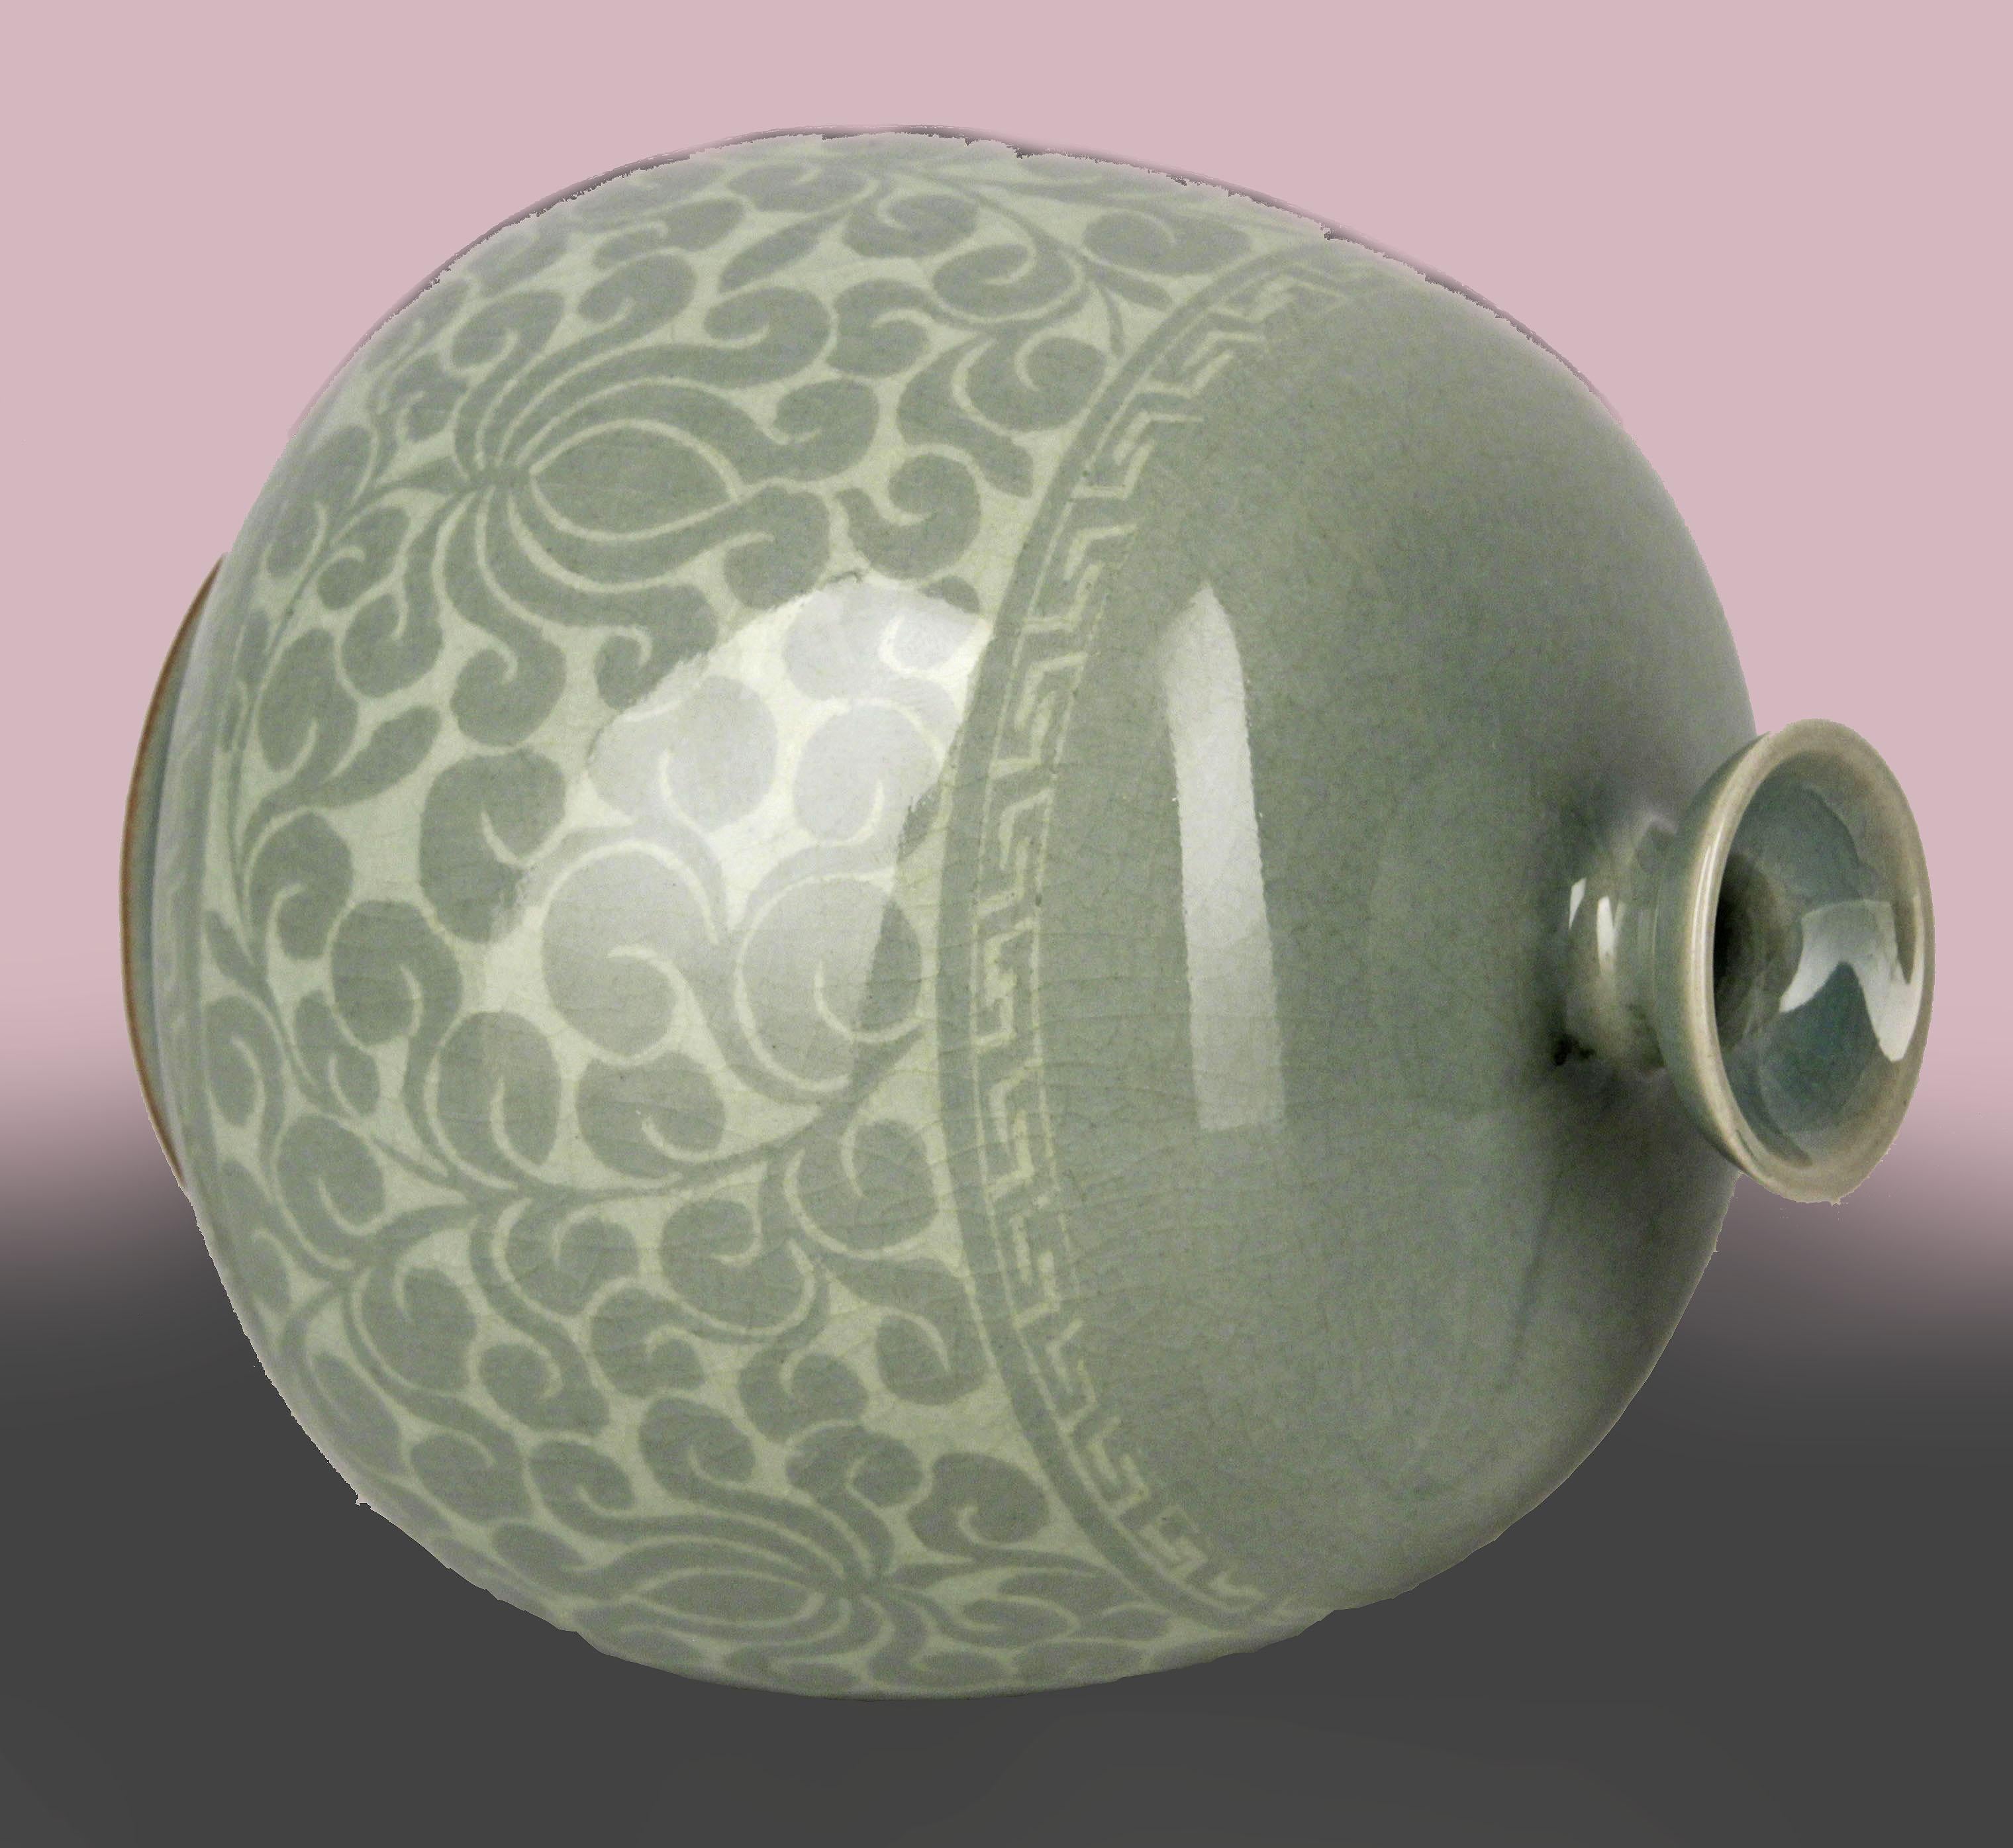 Enameled Mid-20th Century Korean Hand-Crafted Ceramic Celadon Vase with Lotus Decoration For Sale